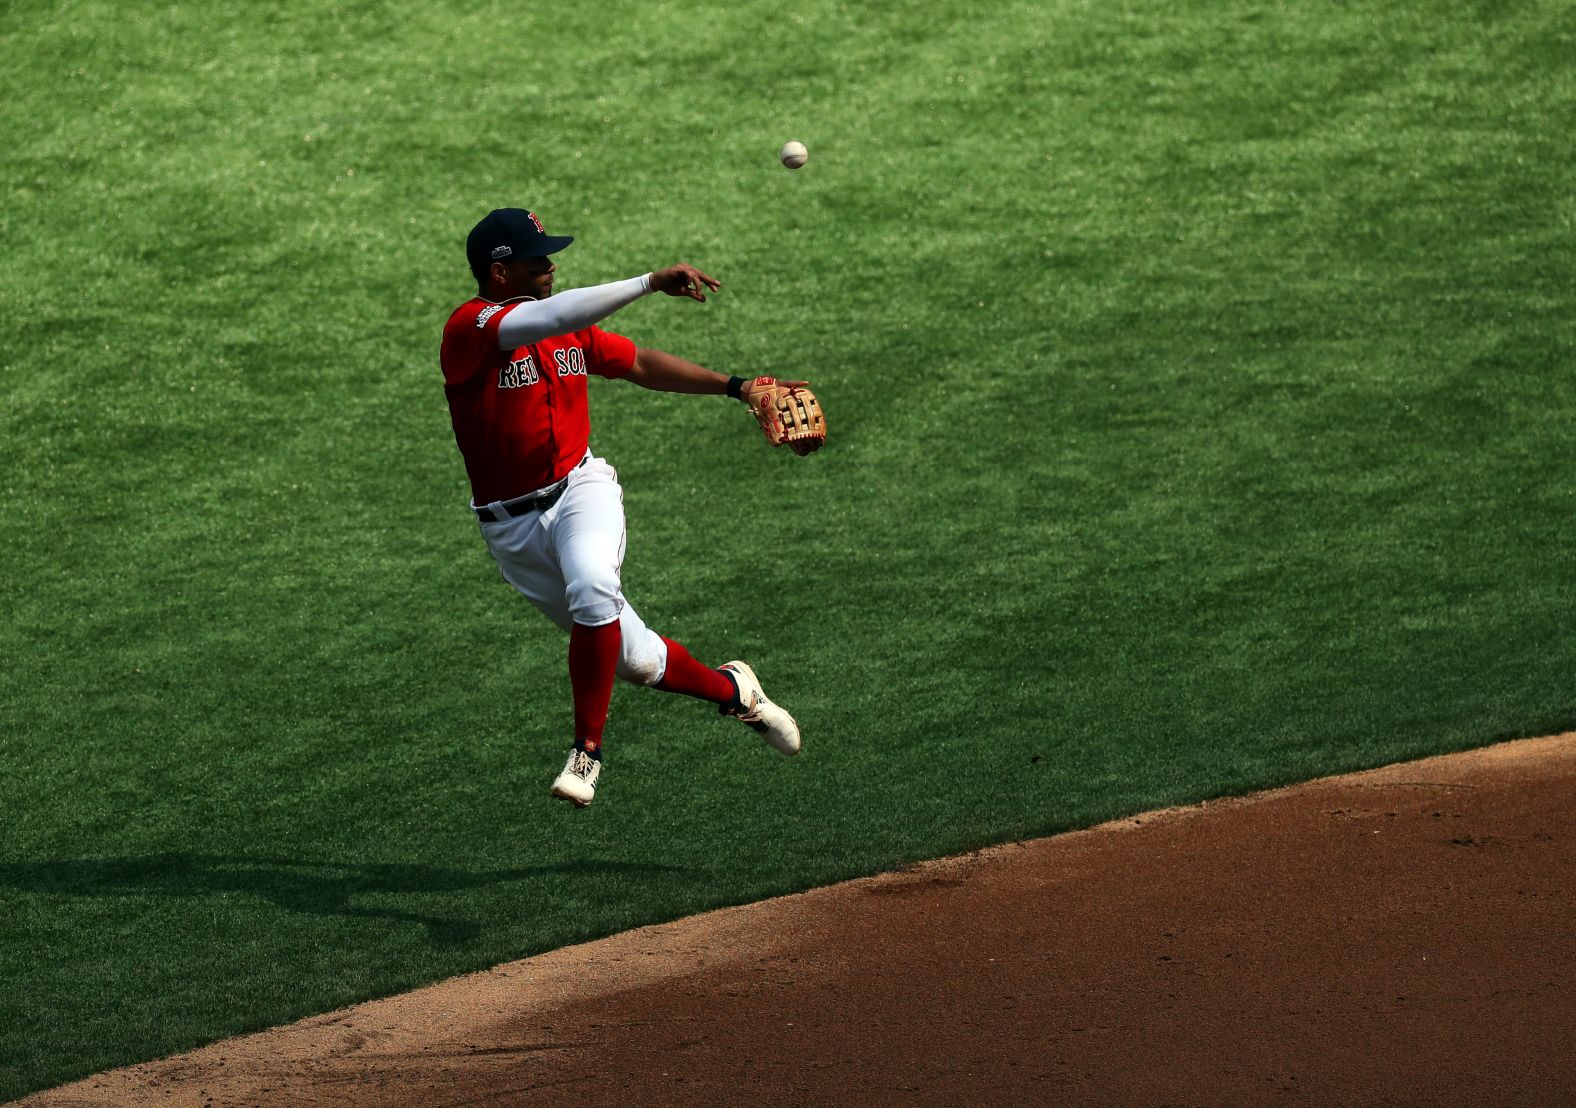 Xander Bogaerts makes a throw during Game 2 of the London Series on Sunday, June 30.